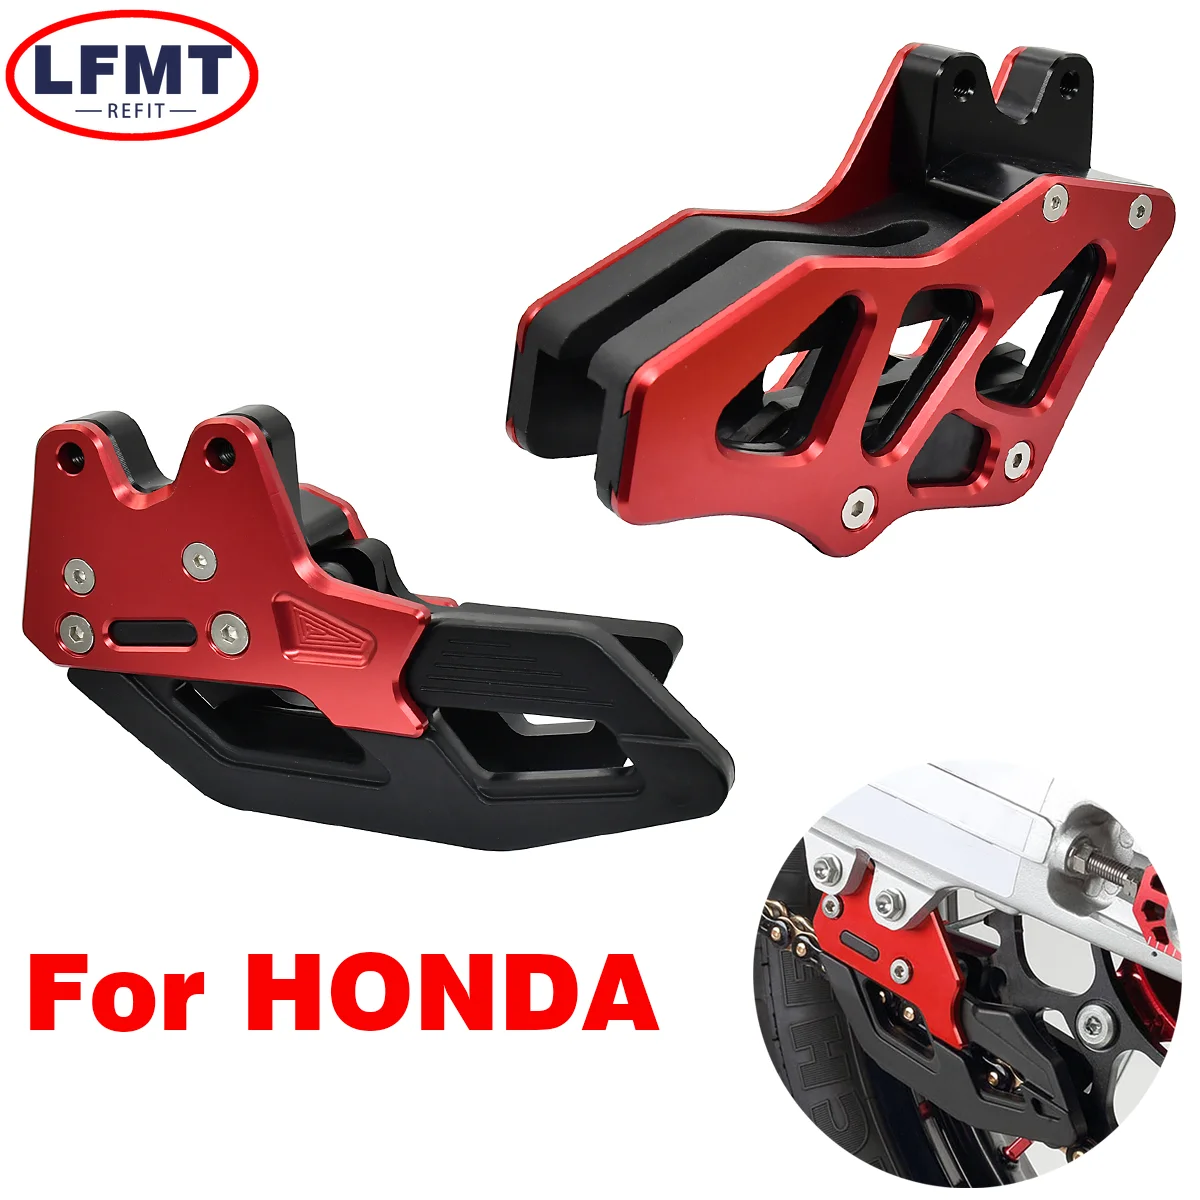 

Motorcycle CNC Chain Guard Guide Protector For Honda CRF150F CRF230F CRF250F 2003-2017 2018 2019 2020 2021 Enduro Dirt Pit Bike